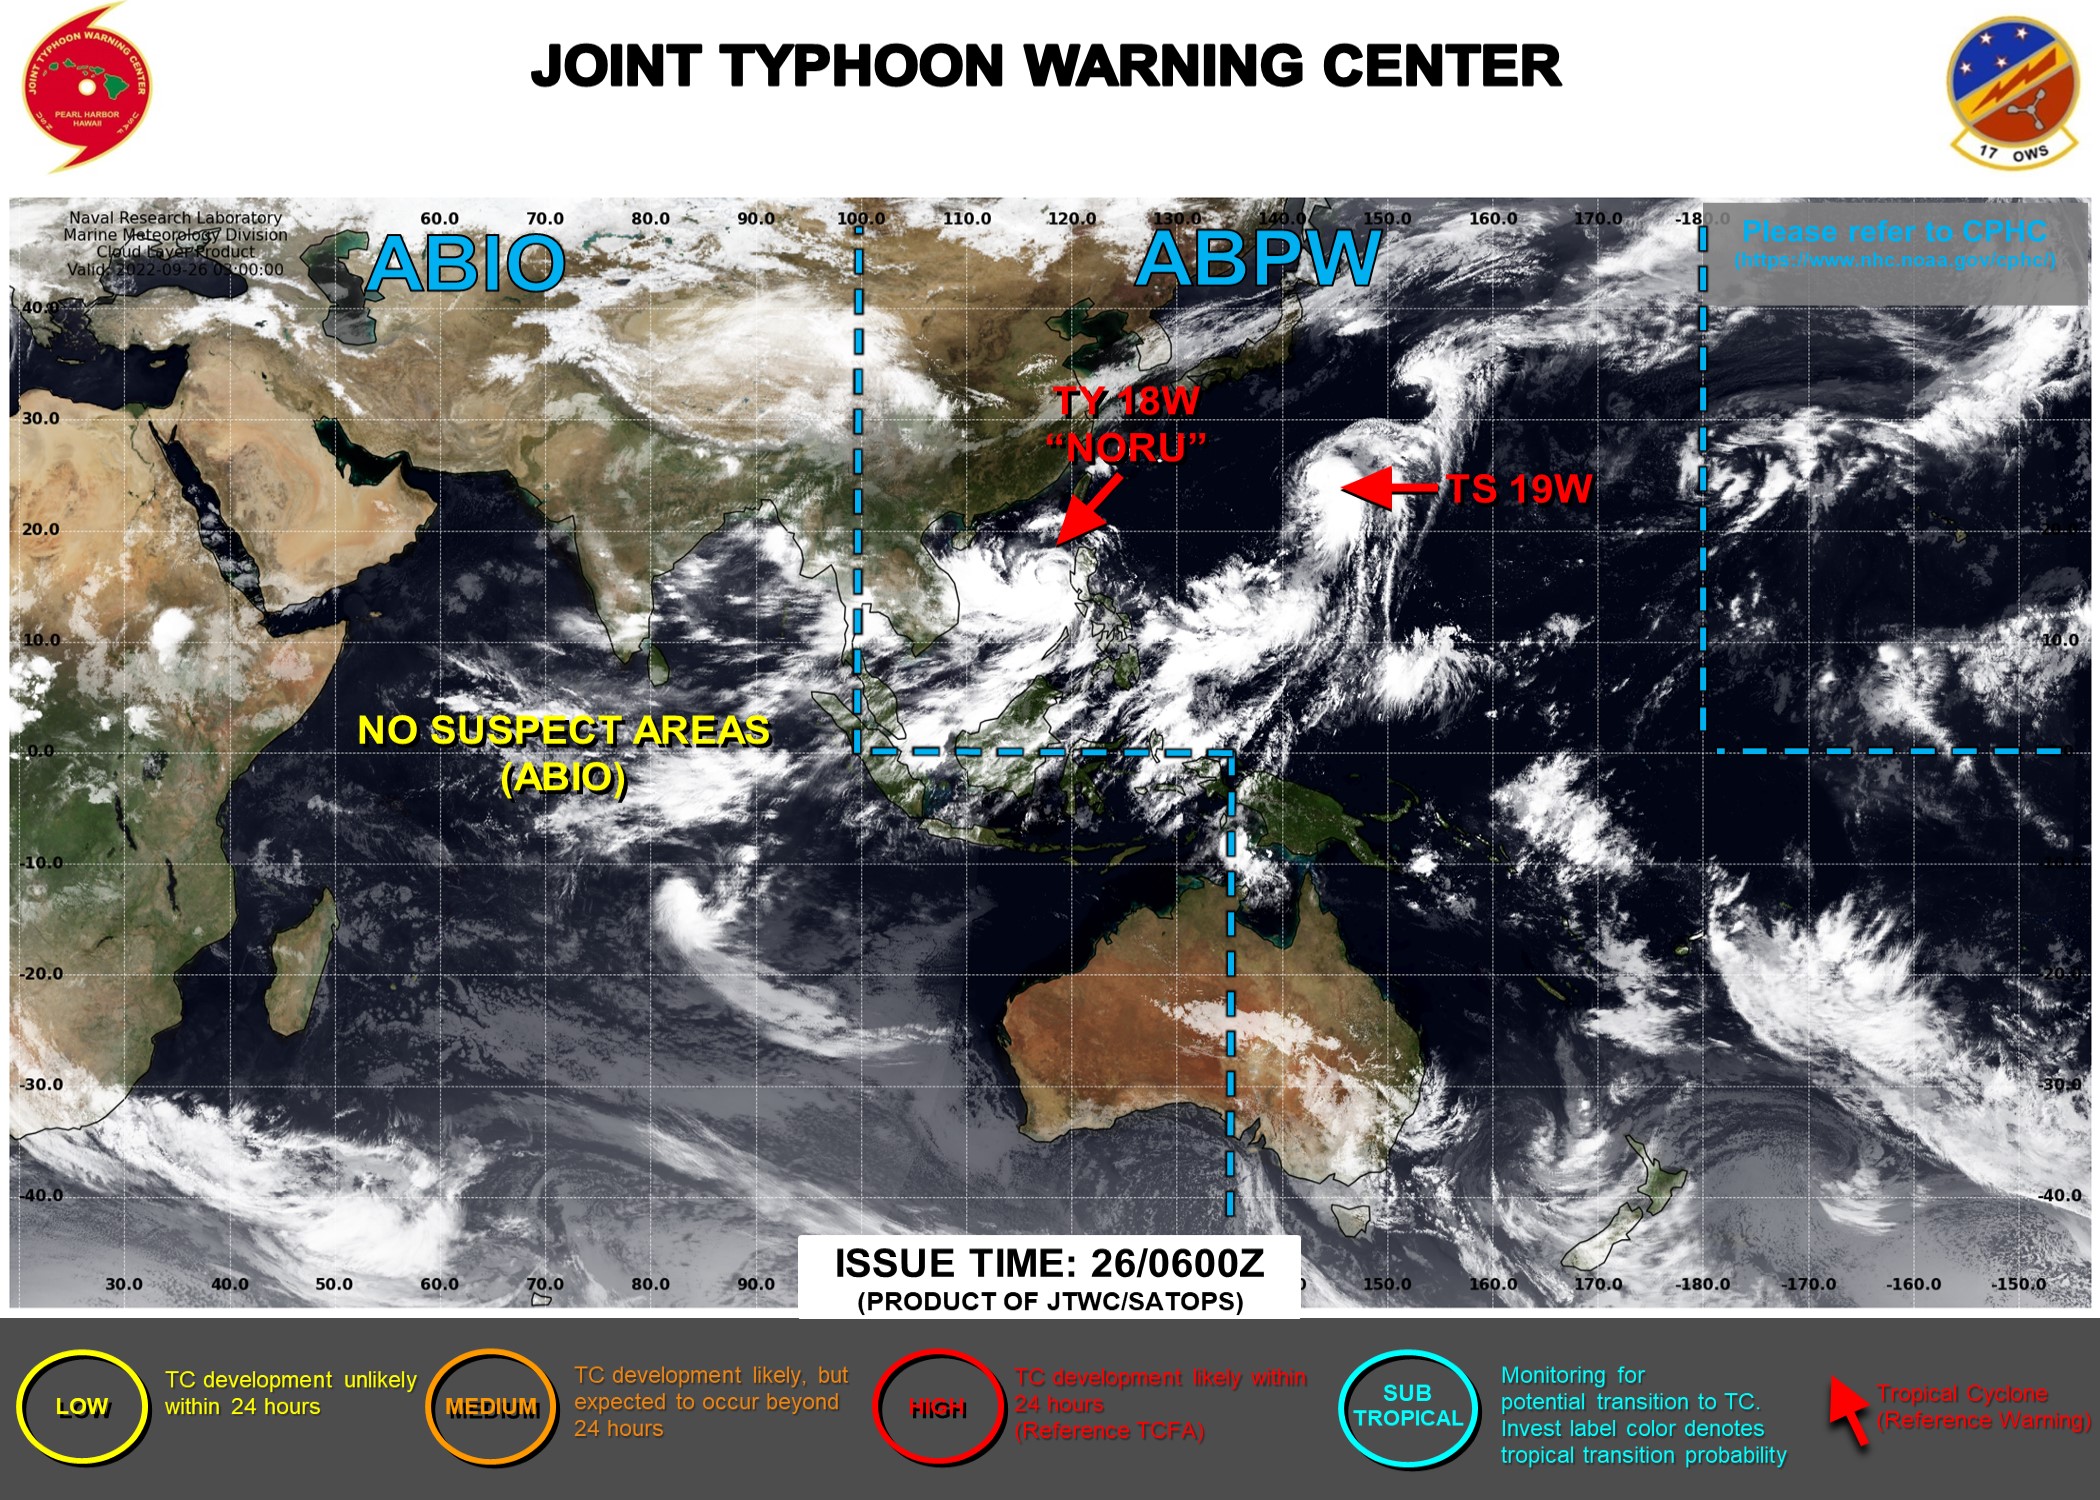 JTWC IS ISSUING 6HOURLY WARNINGS AND 3HOURLY SATELLITE BULLETINS ON 18W(NORU) AND 19W(KULAP).